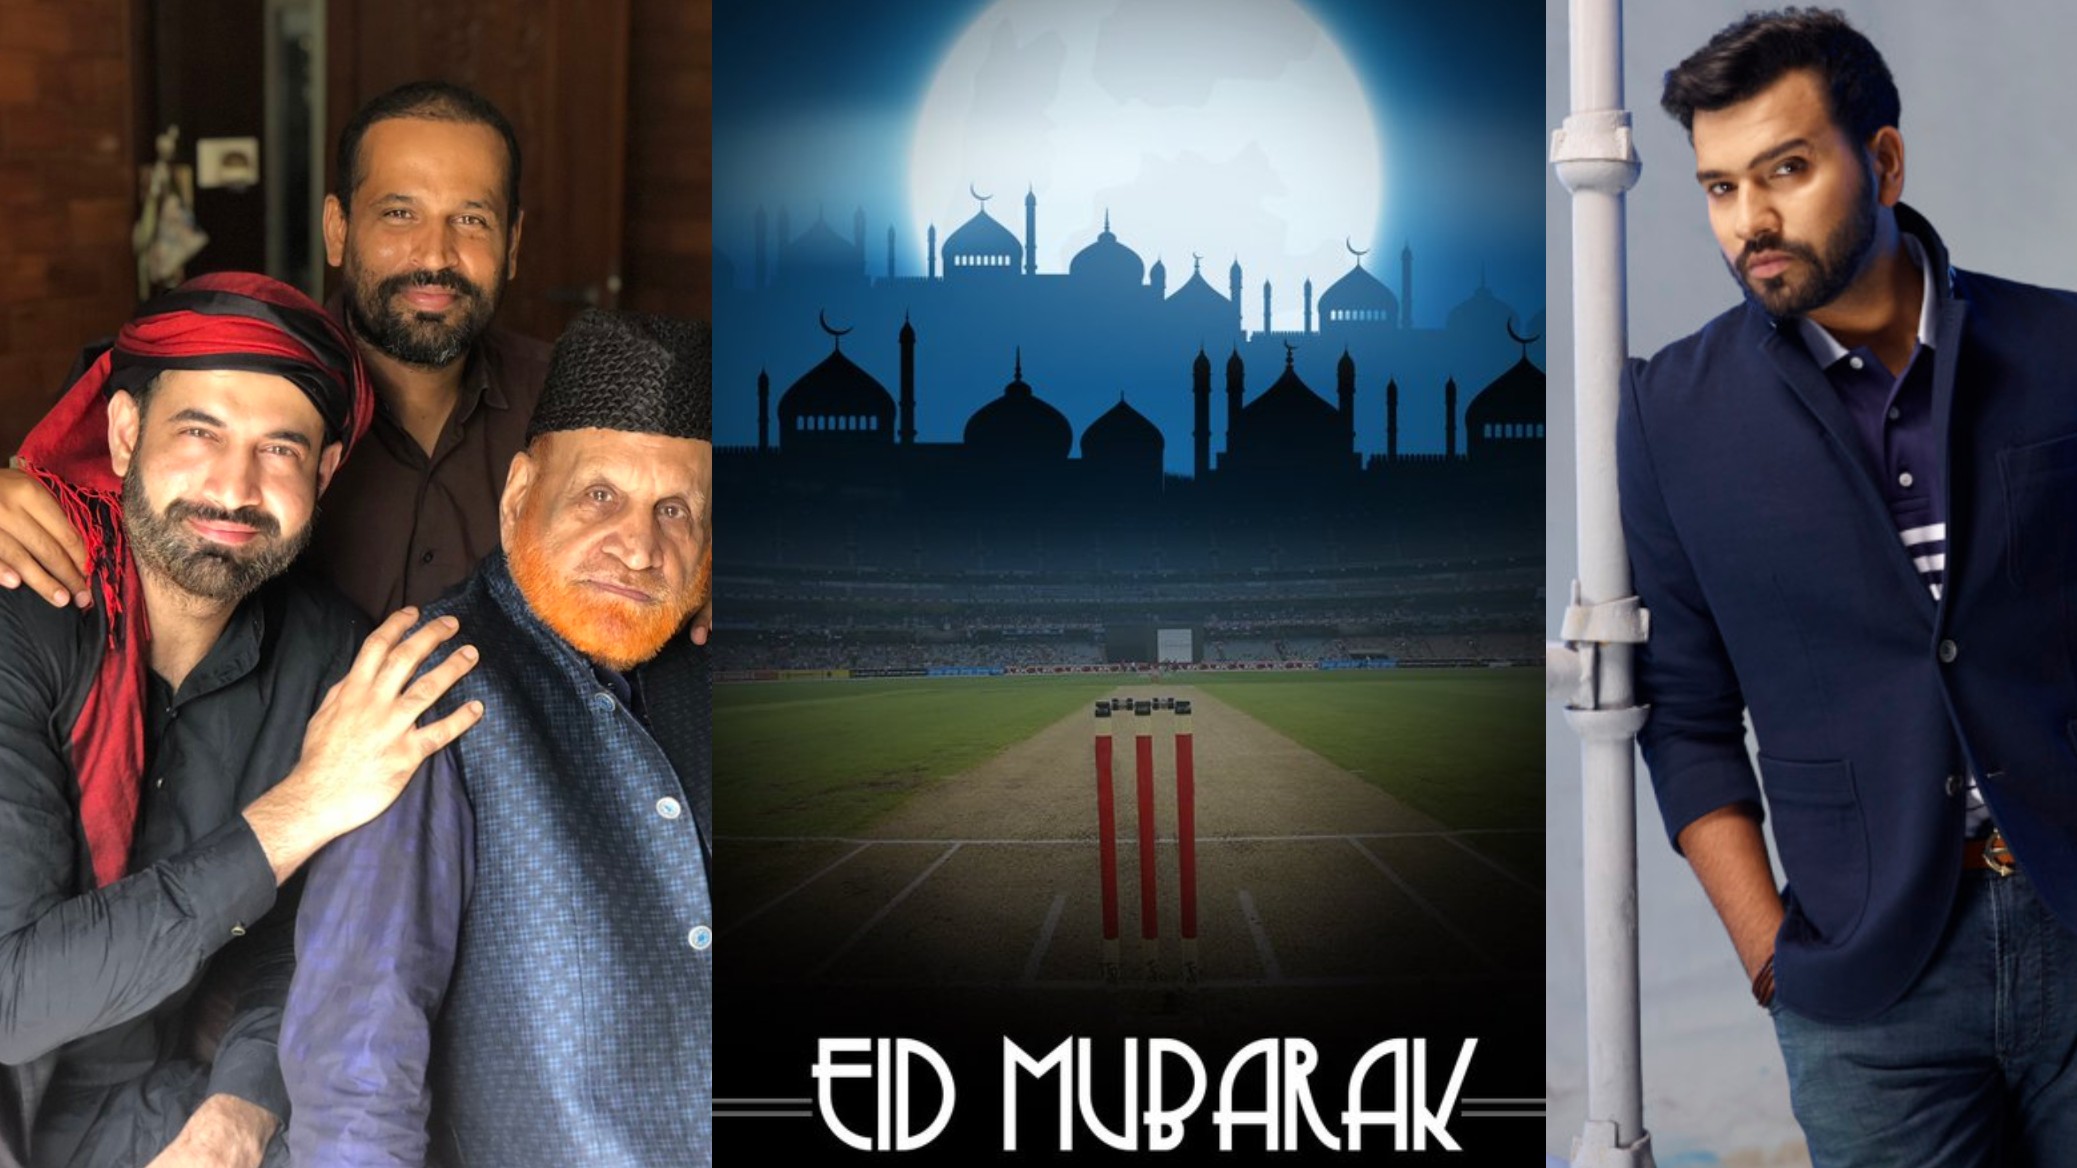 Indian cricketers wish everyone on the auspicious occasion of Eid-Al-Adha